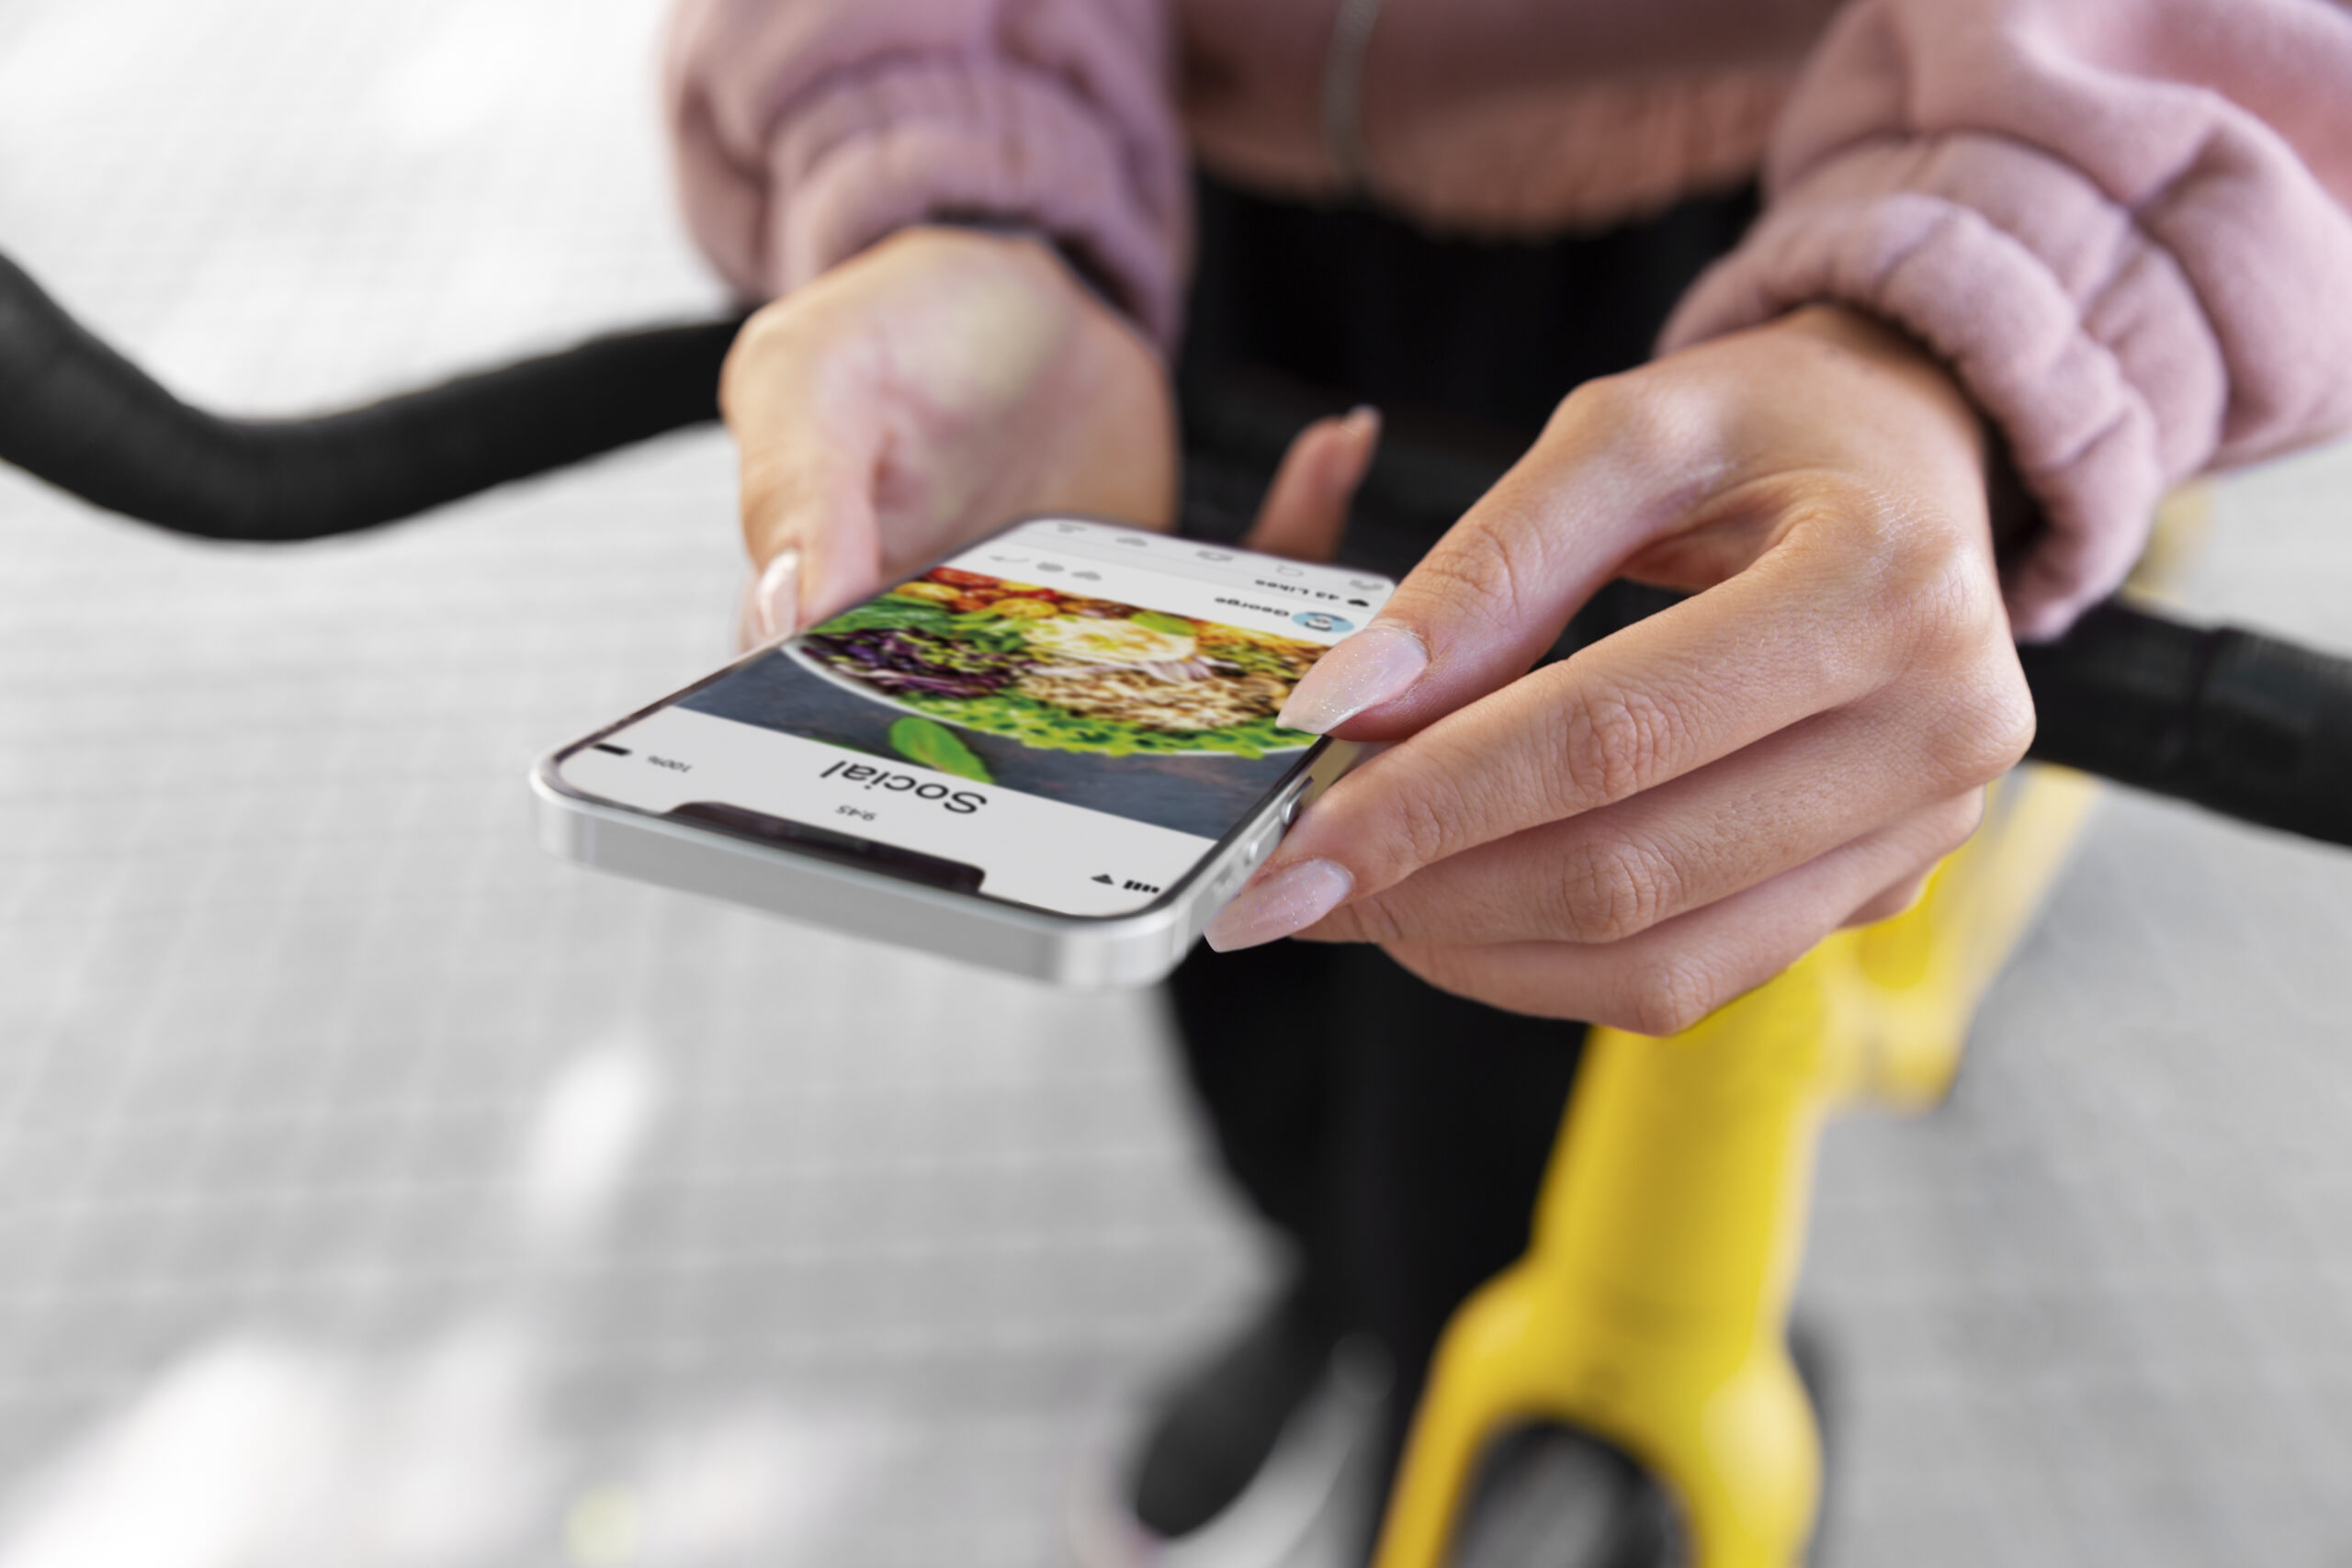 How to Develop a Mobile App for Your Local Food Business